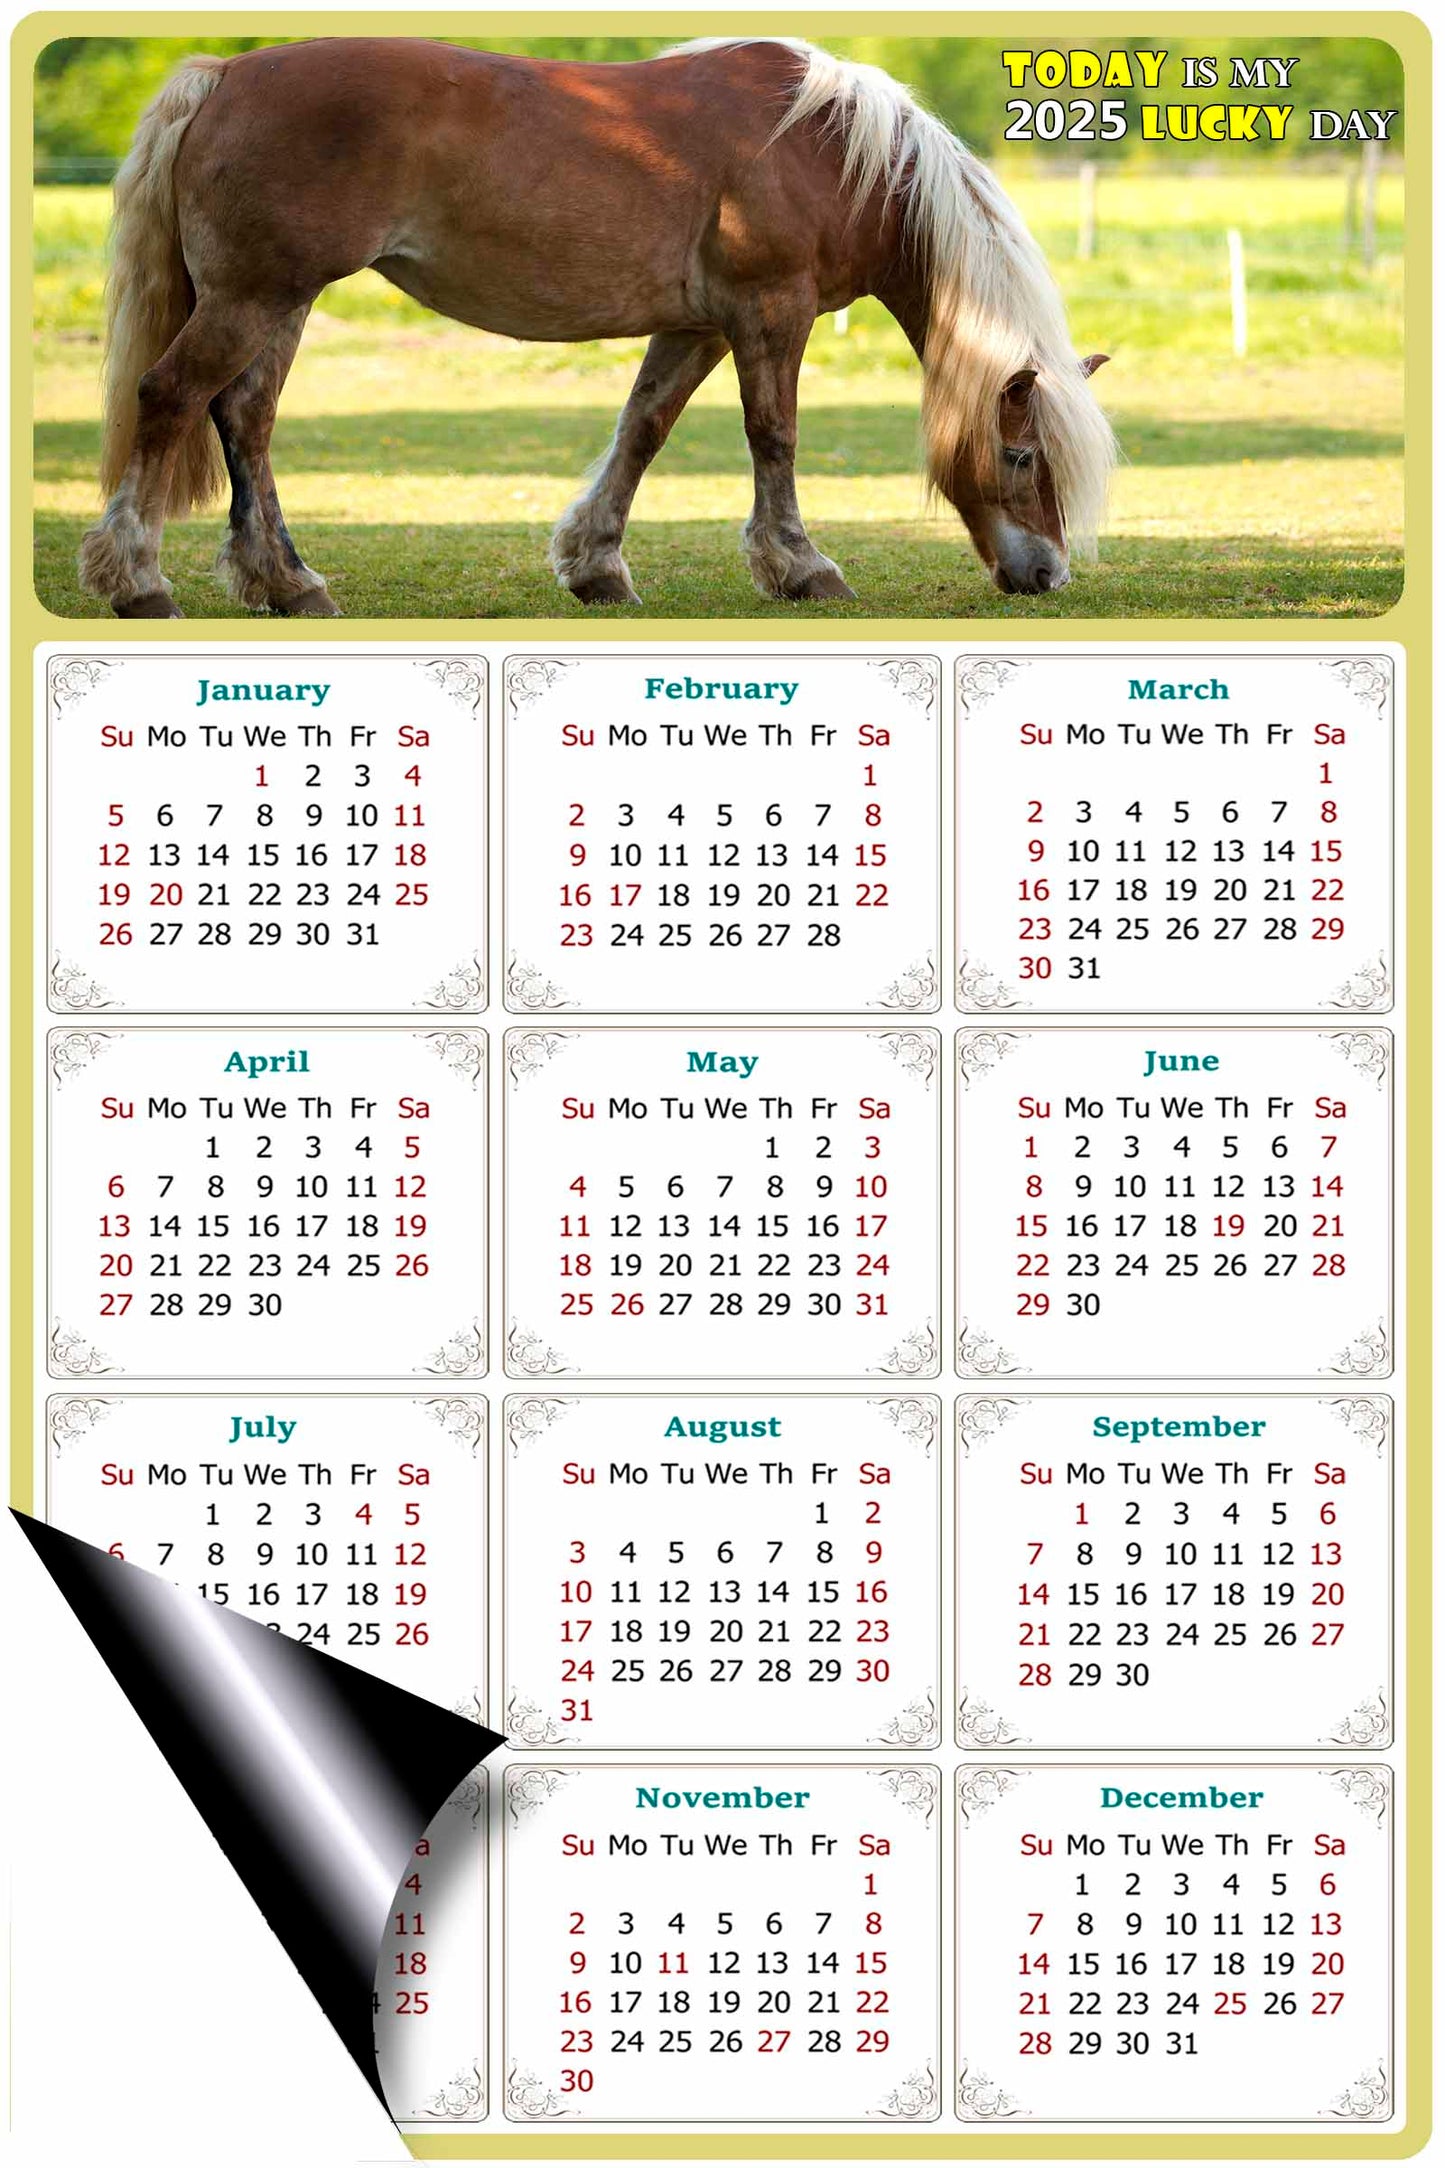 2025 Magnetic Calendar - Calendar Magnets - Today is my Lucky Day - (Fade, Tear, and Water Resistant) - Horses Themed 016